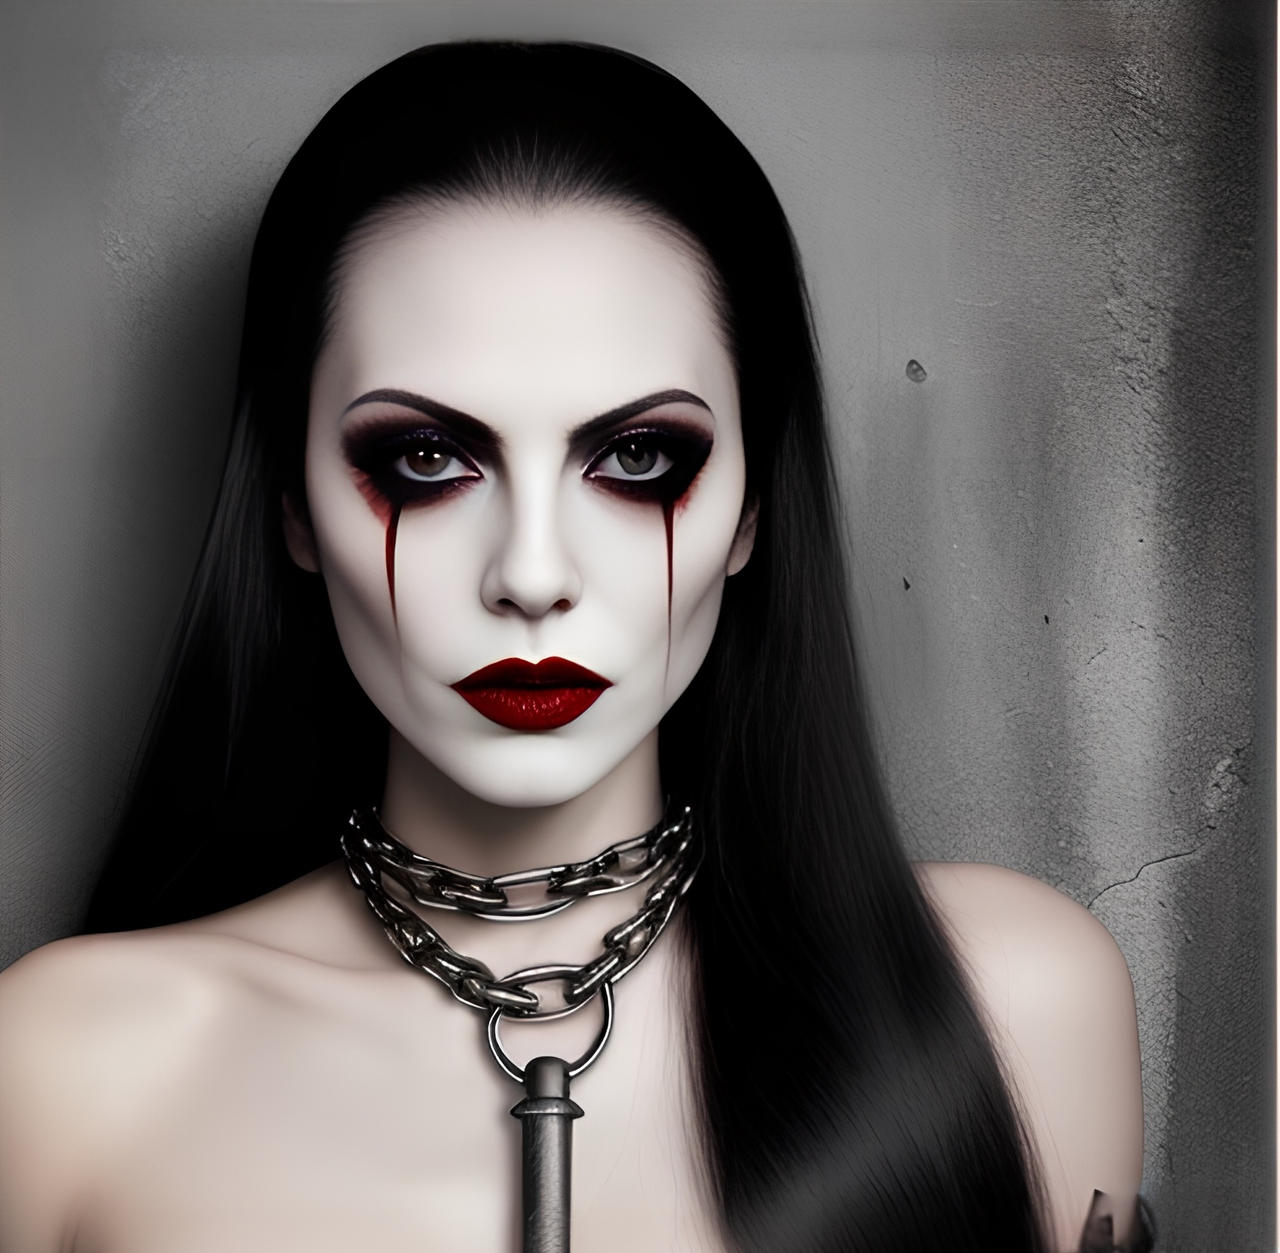 Wife of Dracula by neomars on DeviantArt